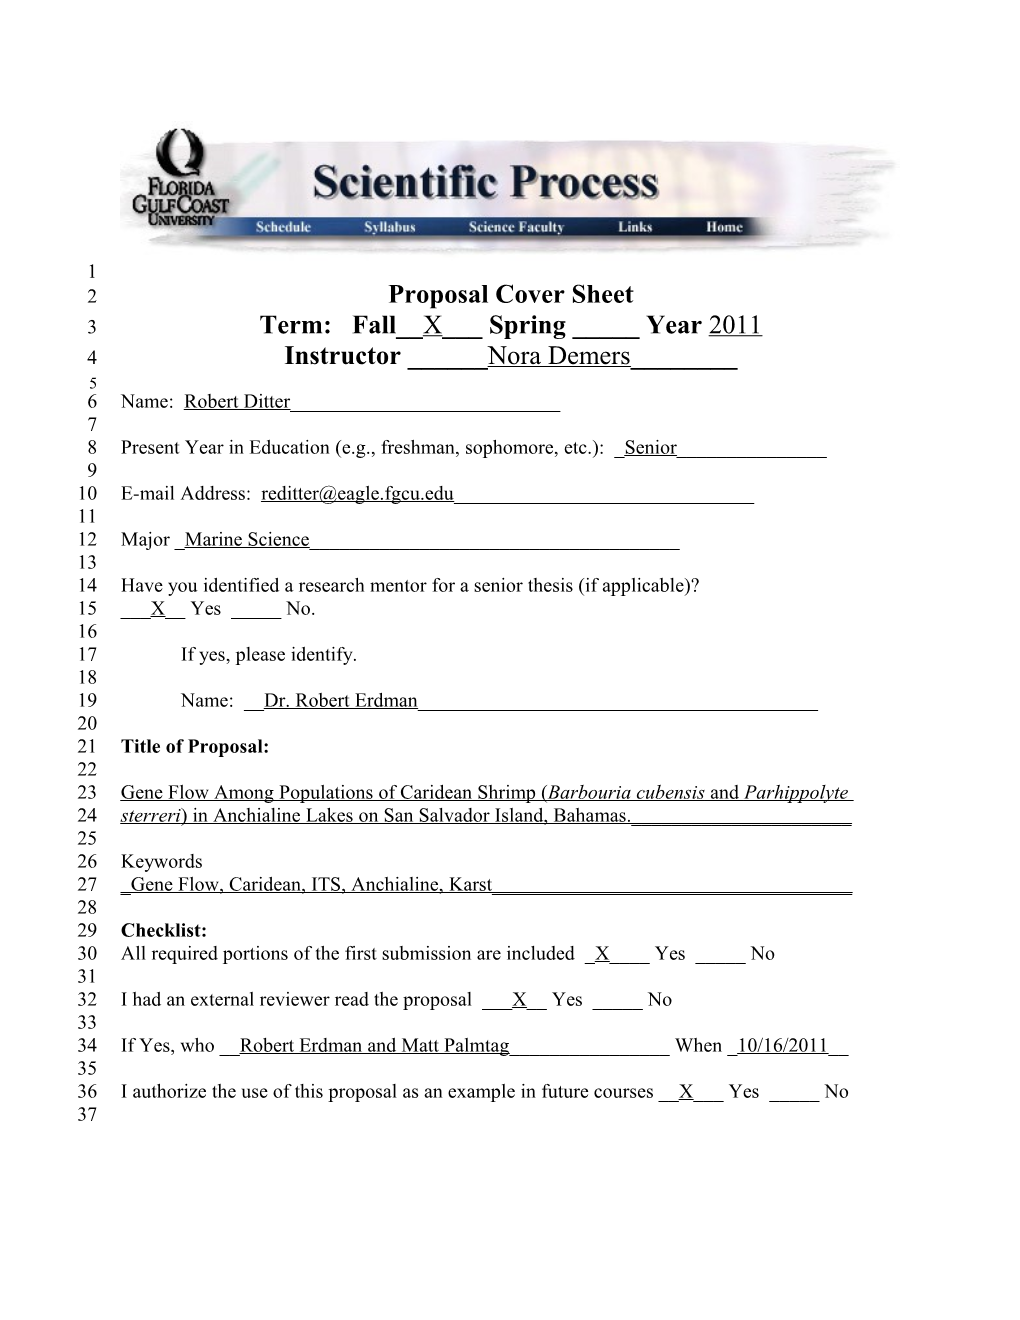 Proposal Cover Sheet